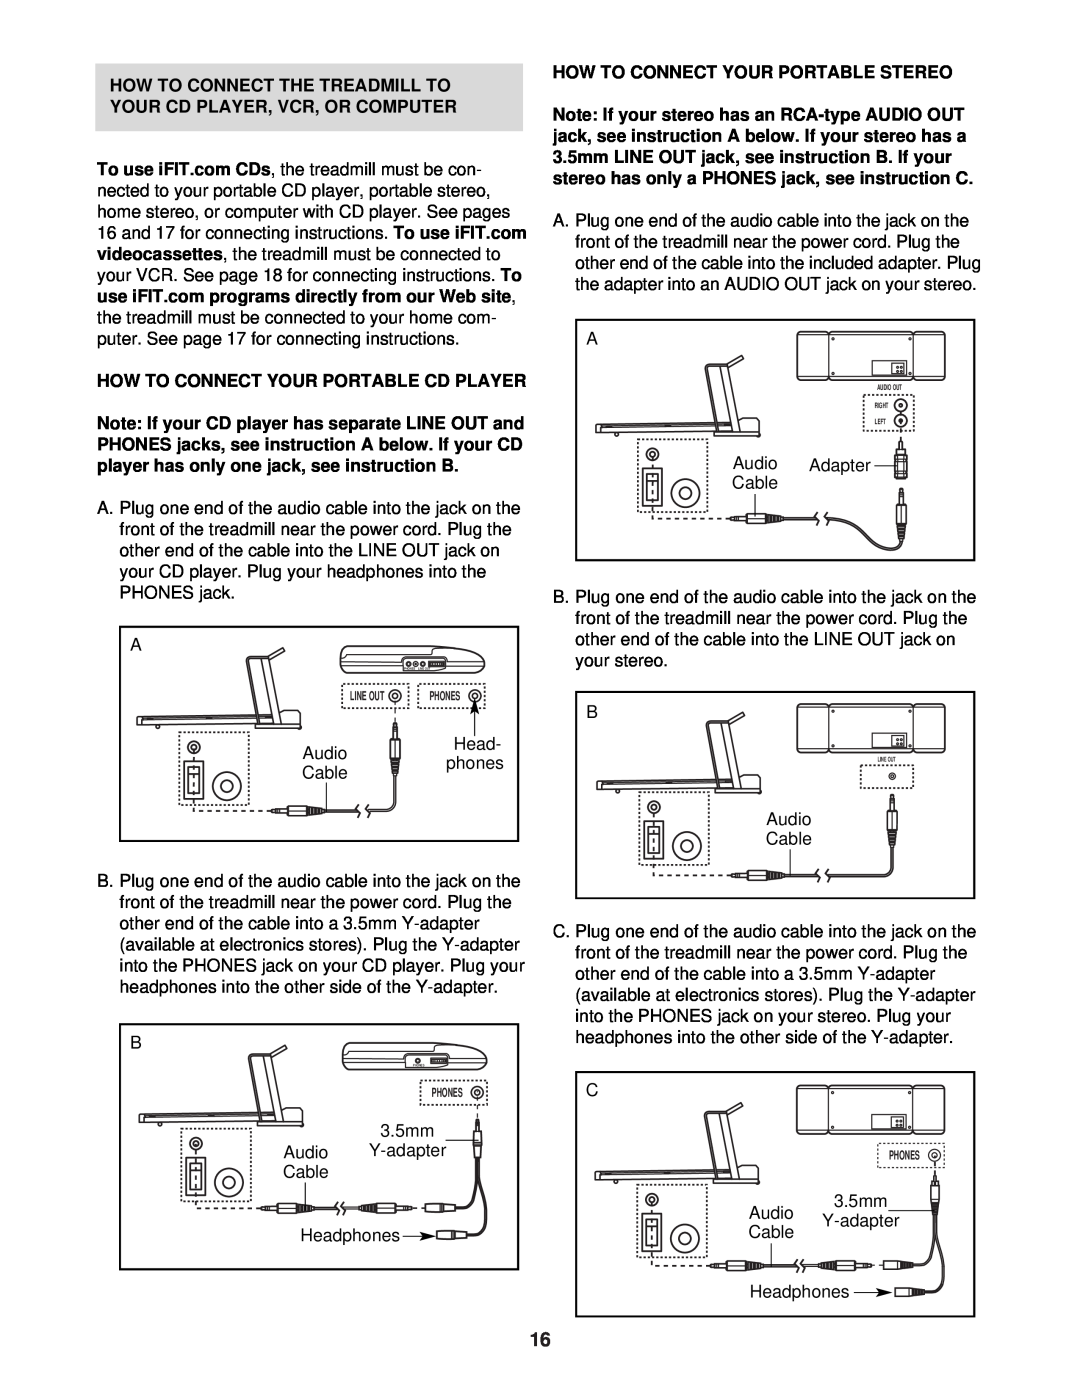 ProForm PFTL91330 How To Connect The Treadmill To Your Cd Player, Vcr, Or Computer, How To Connect Your Portable Cd Player 